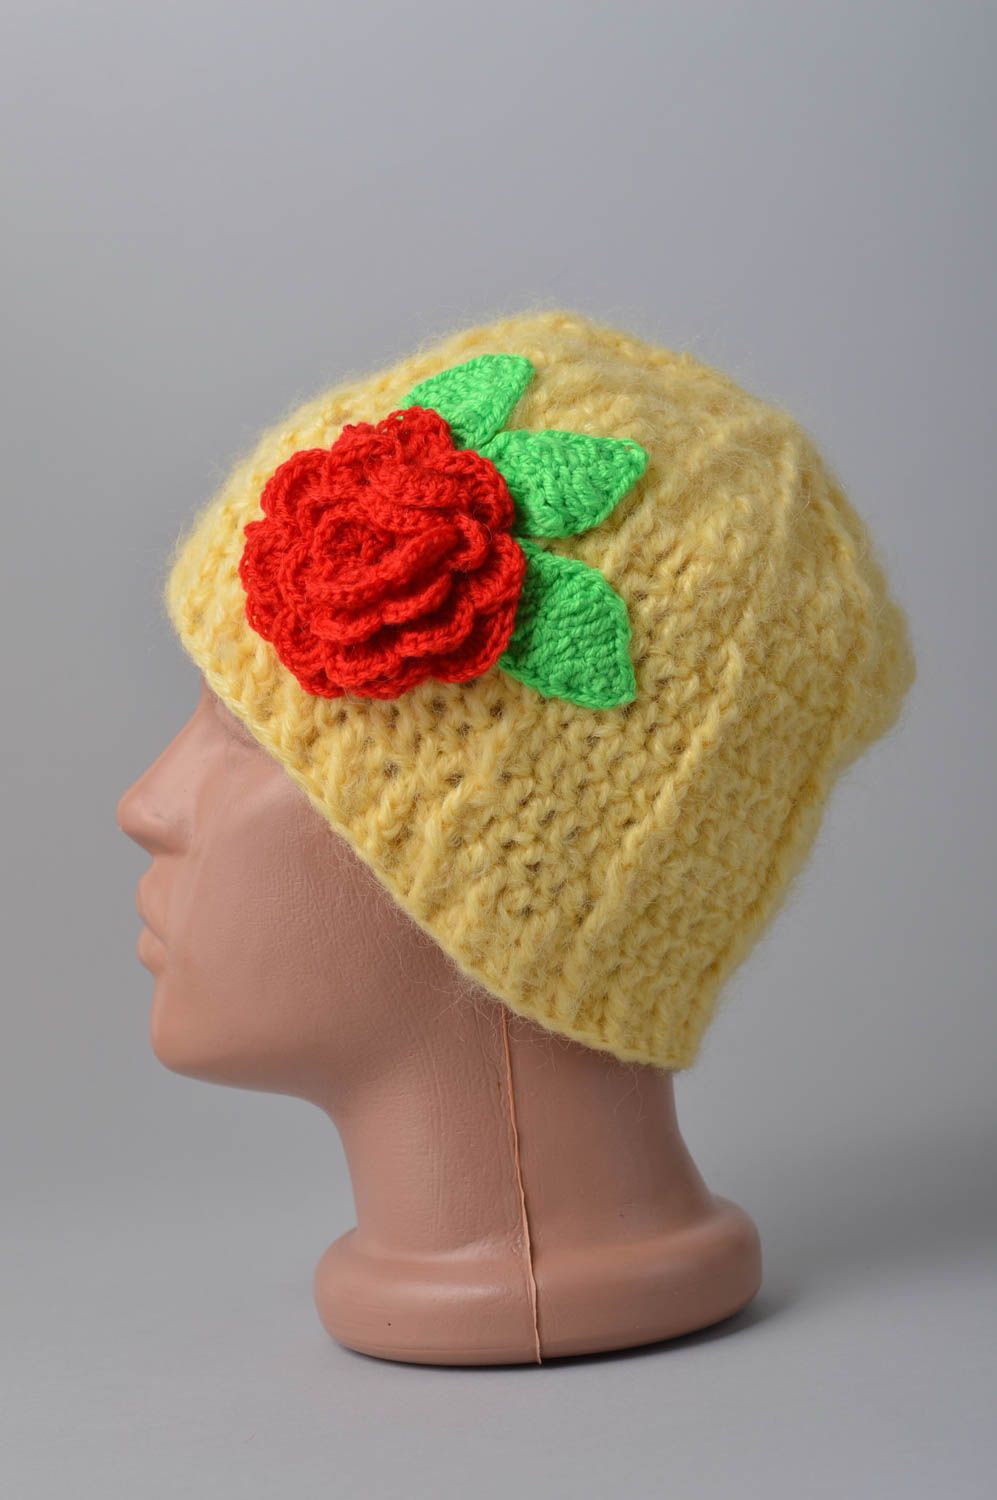 Unusual handmade crochet hat fashion accessories crochet ideas gifts for her photo 3